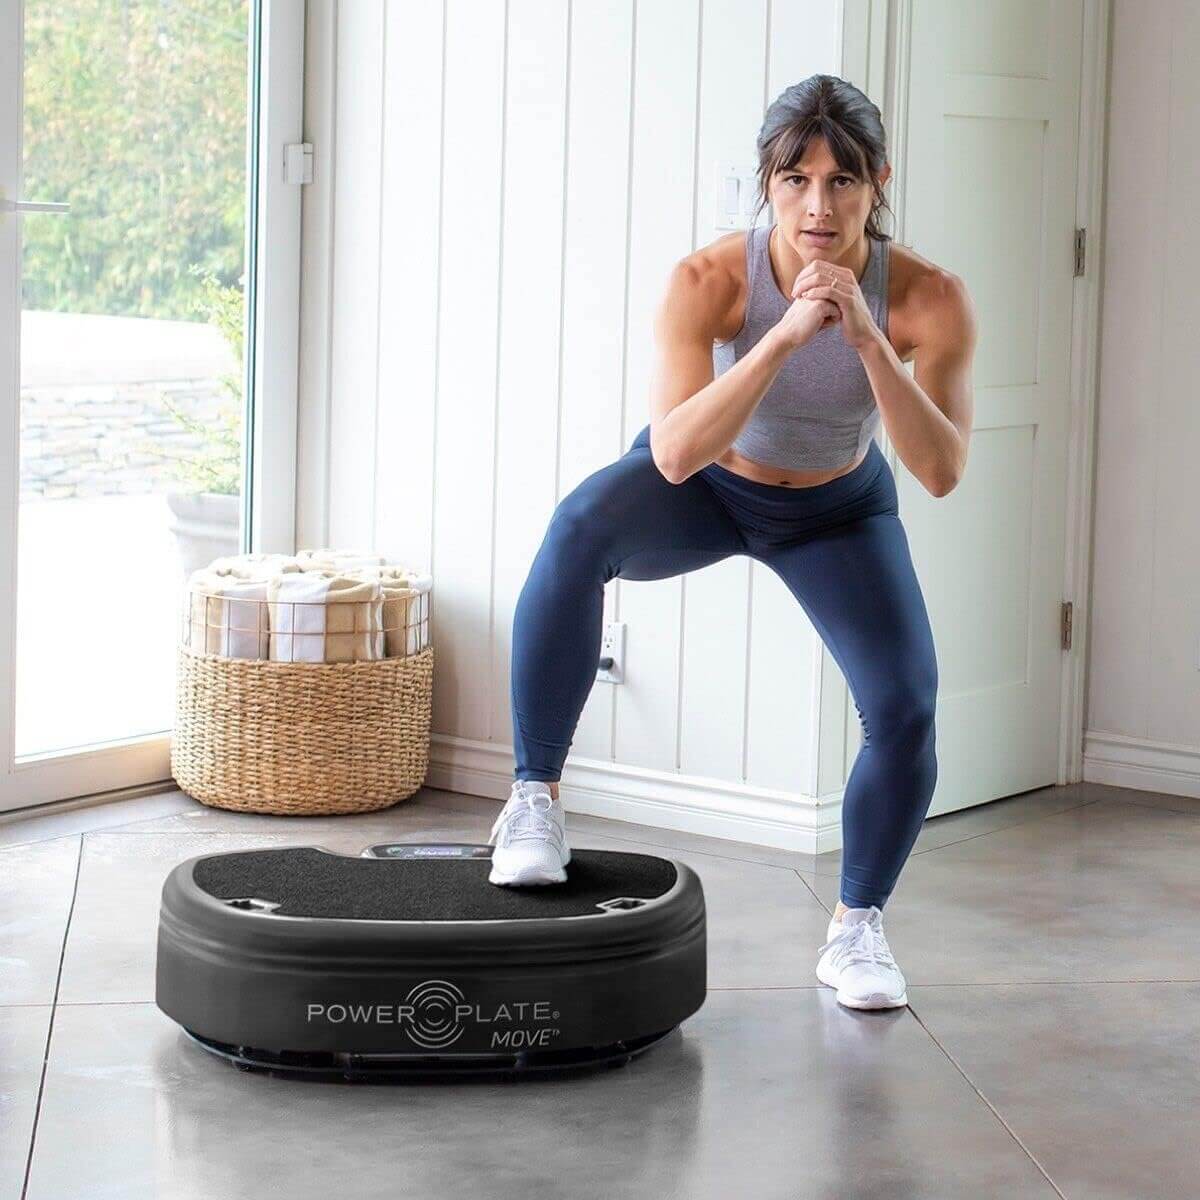 Power Plate MOVE - Vibration Trainer